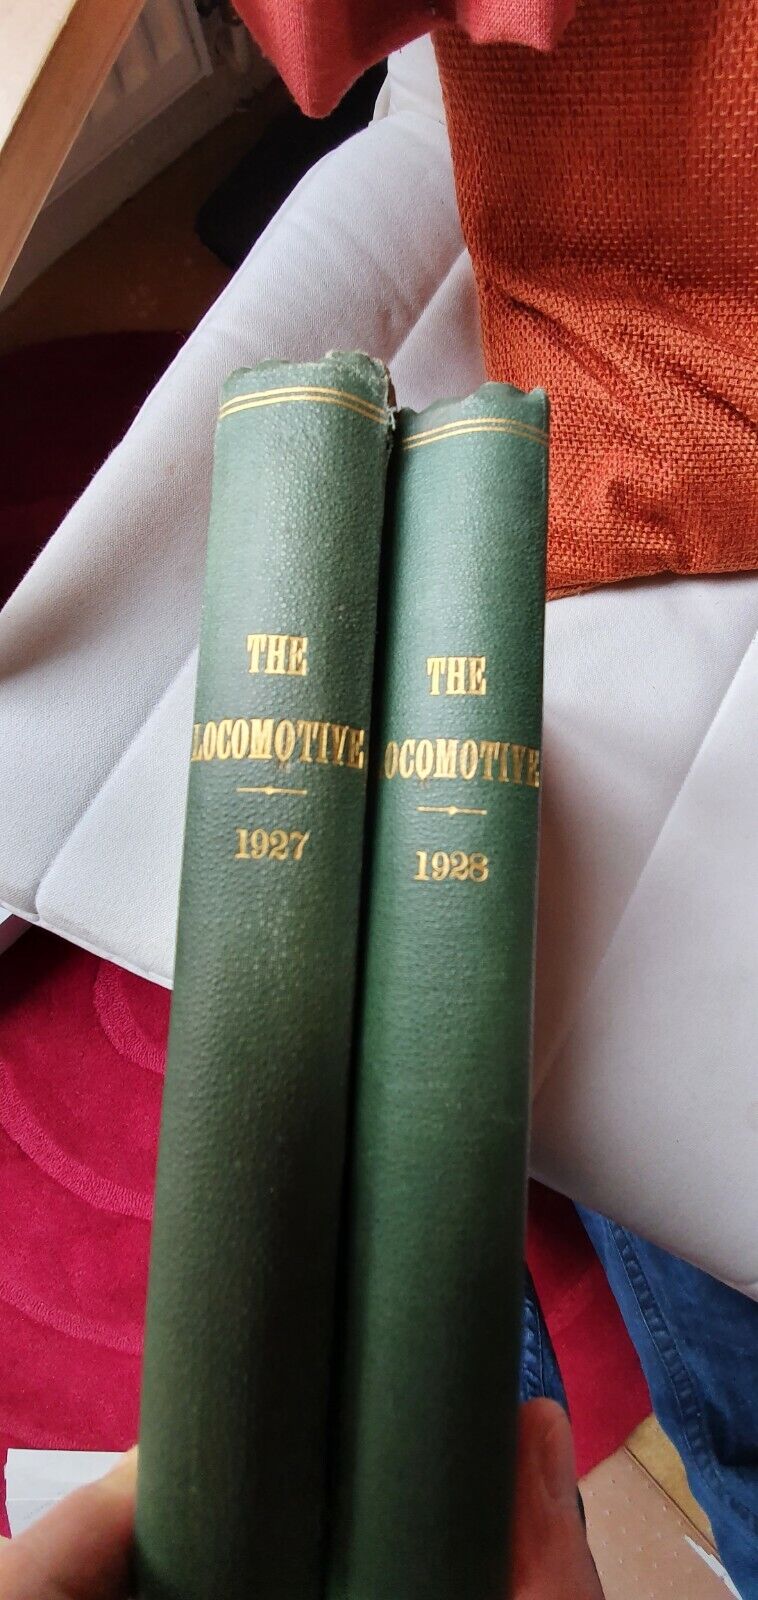 The Locomotive Railway Carriage & Wagon Review. 1927 & 1928 complete volumes